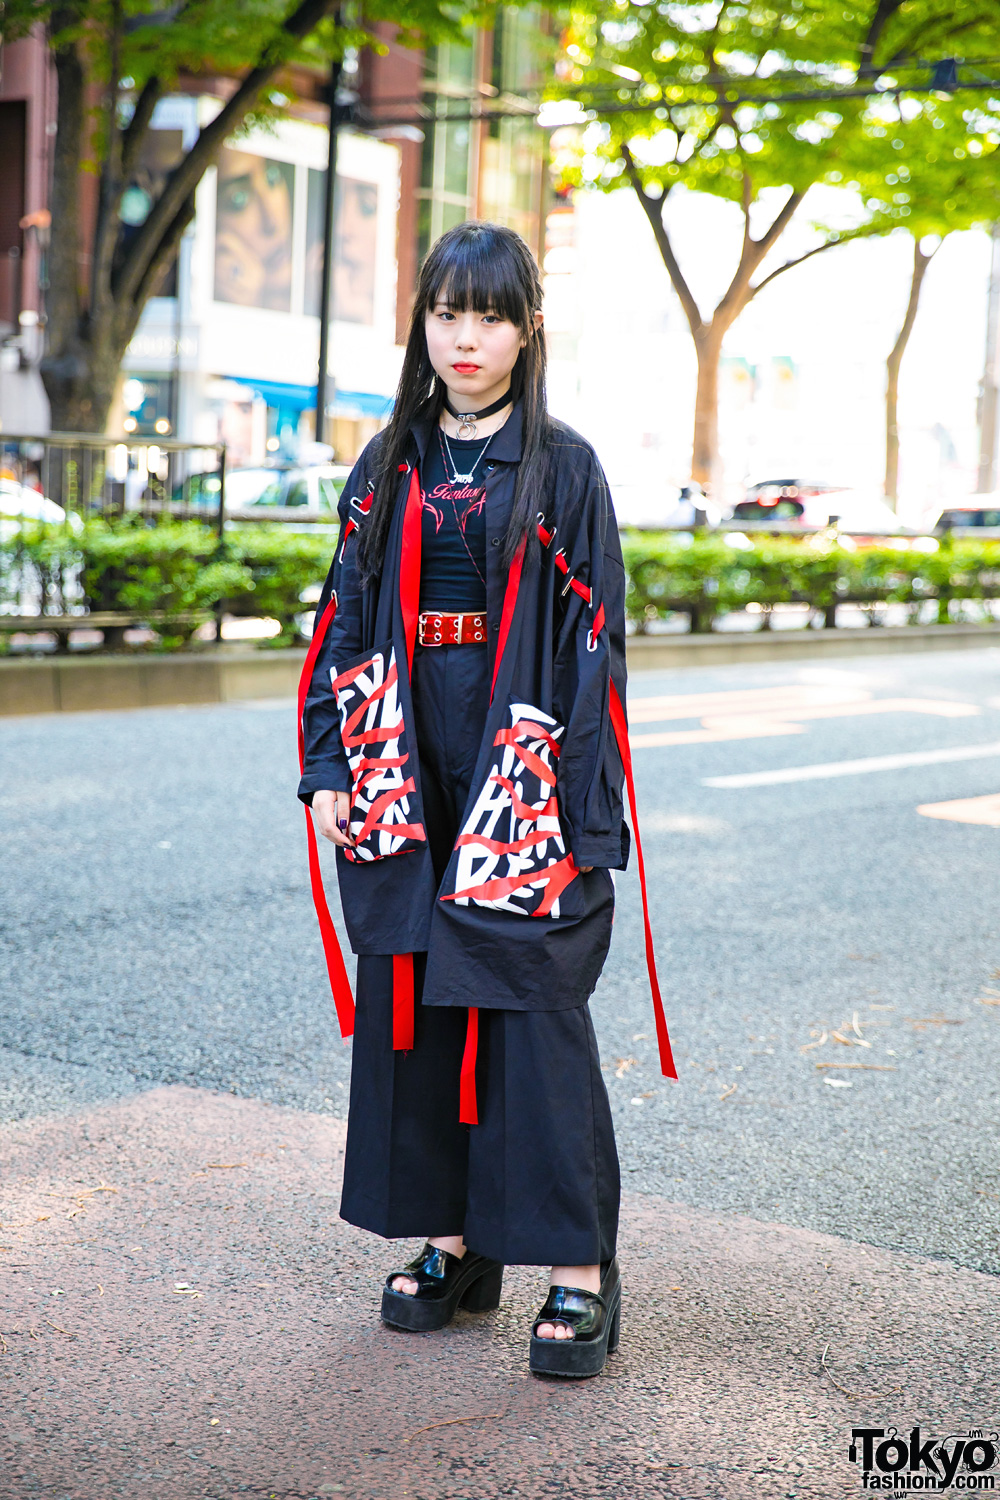 Red & Black Tokyo Street Style w/ Vintage Ribbons Jacket, Open The Door, Oh Pearl & Bubbles